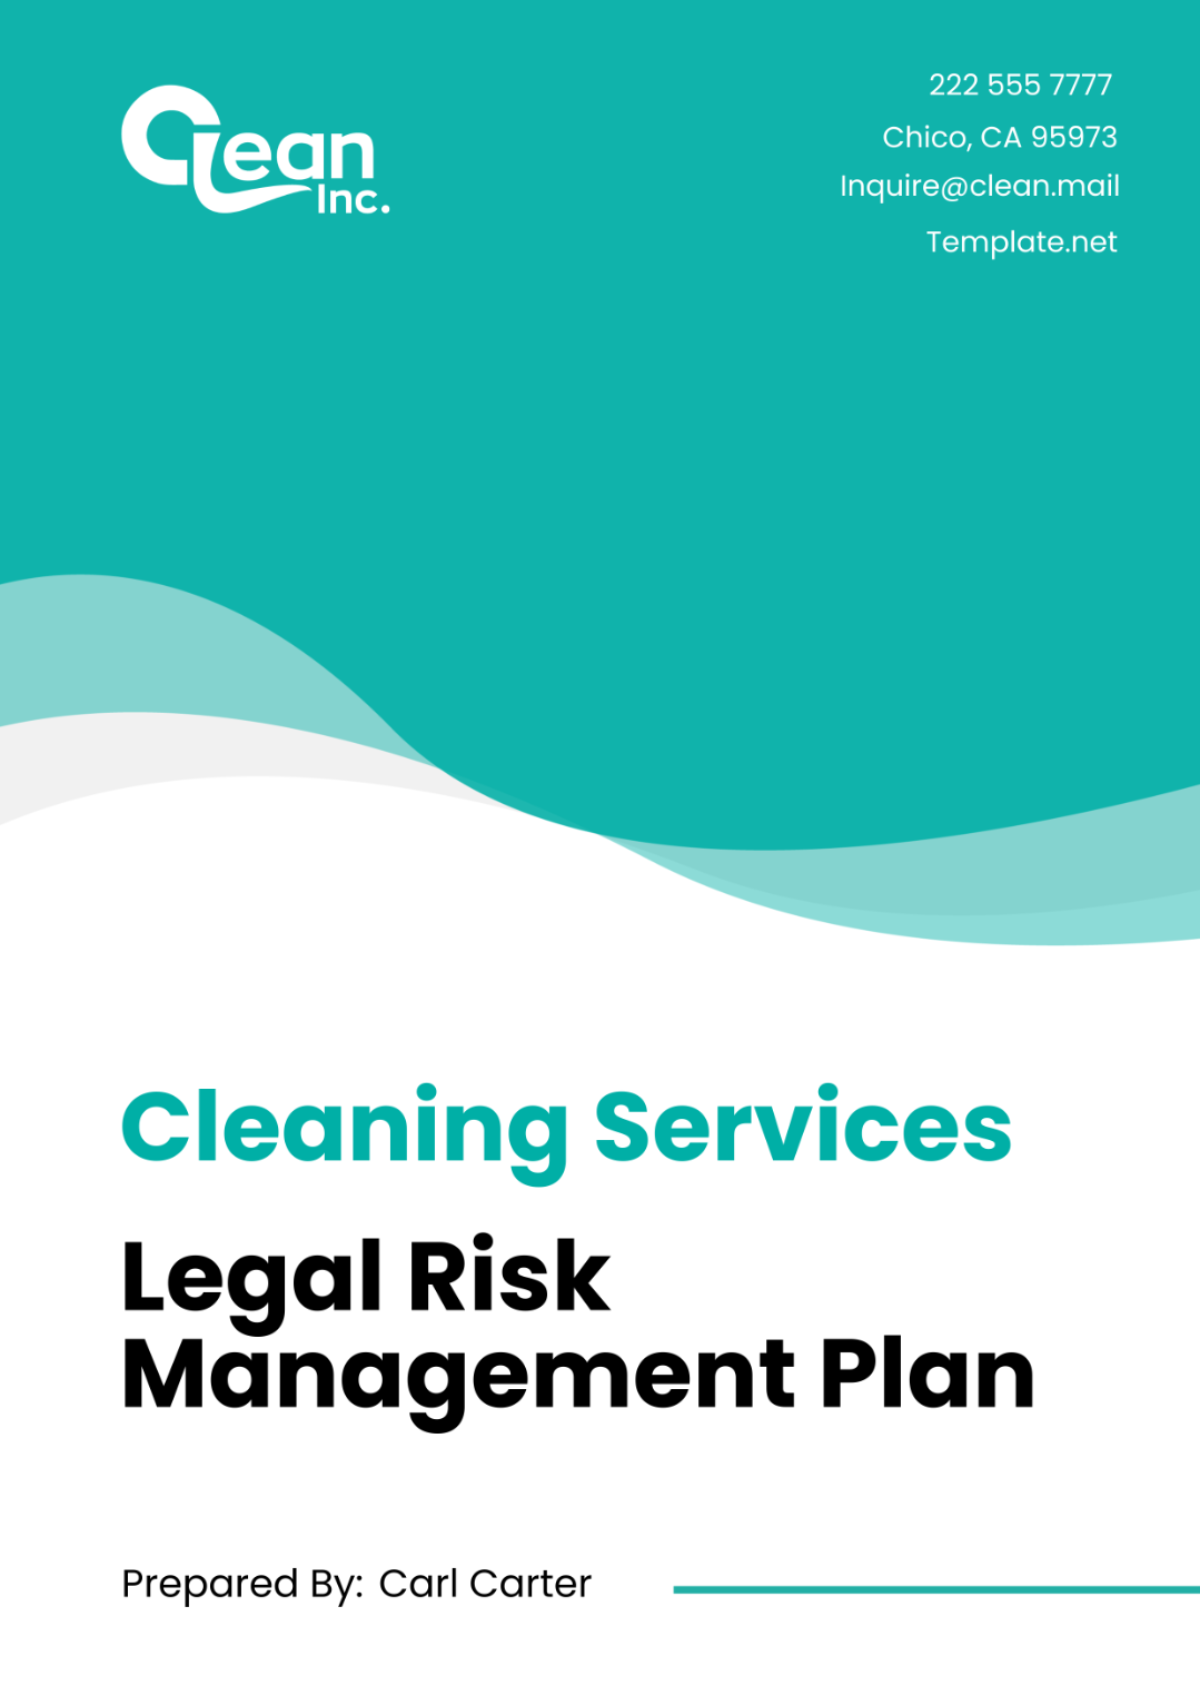 Cleaning Services Legal Risk Management Plan Template